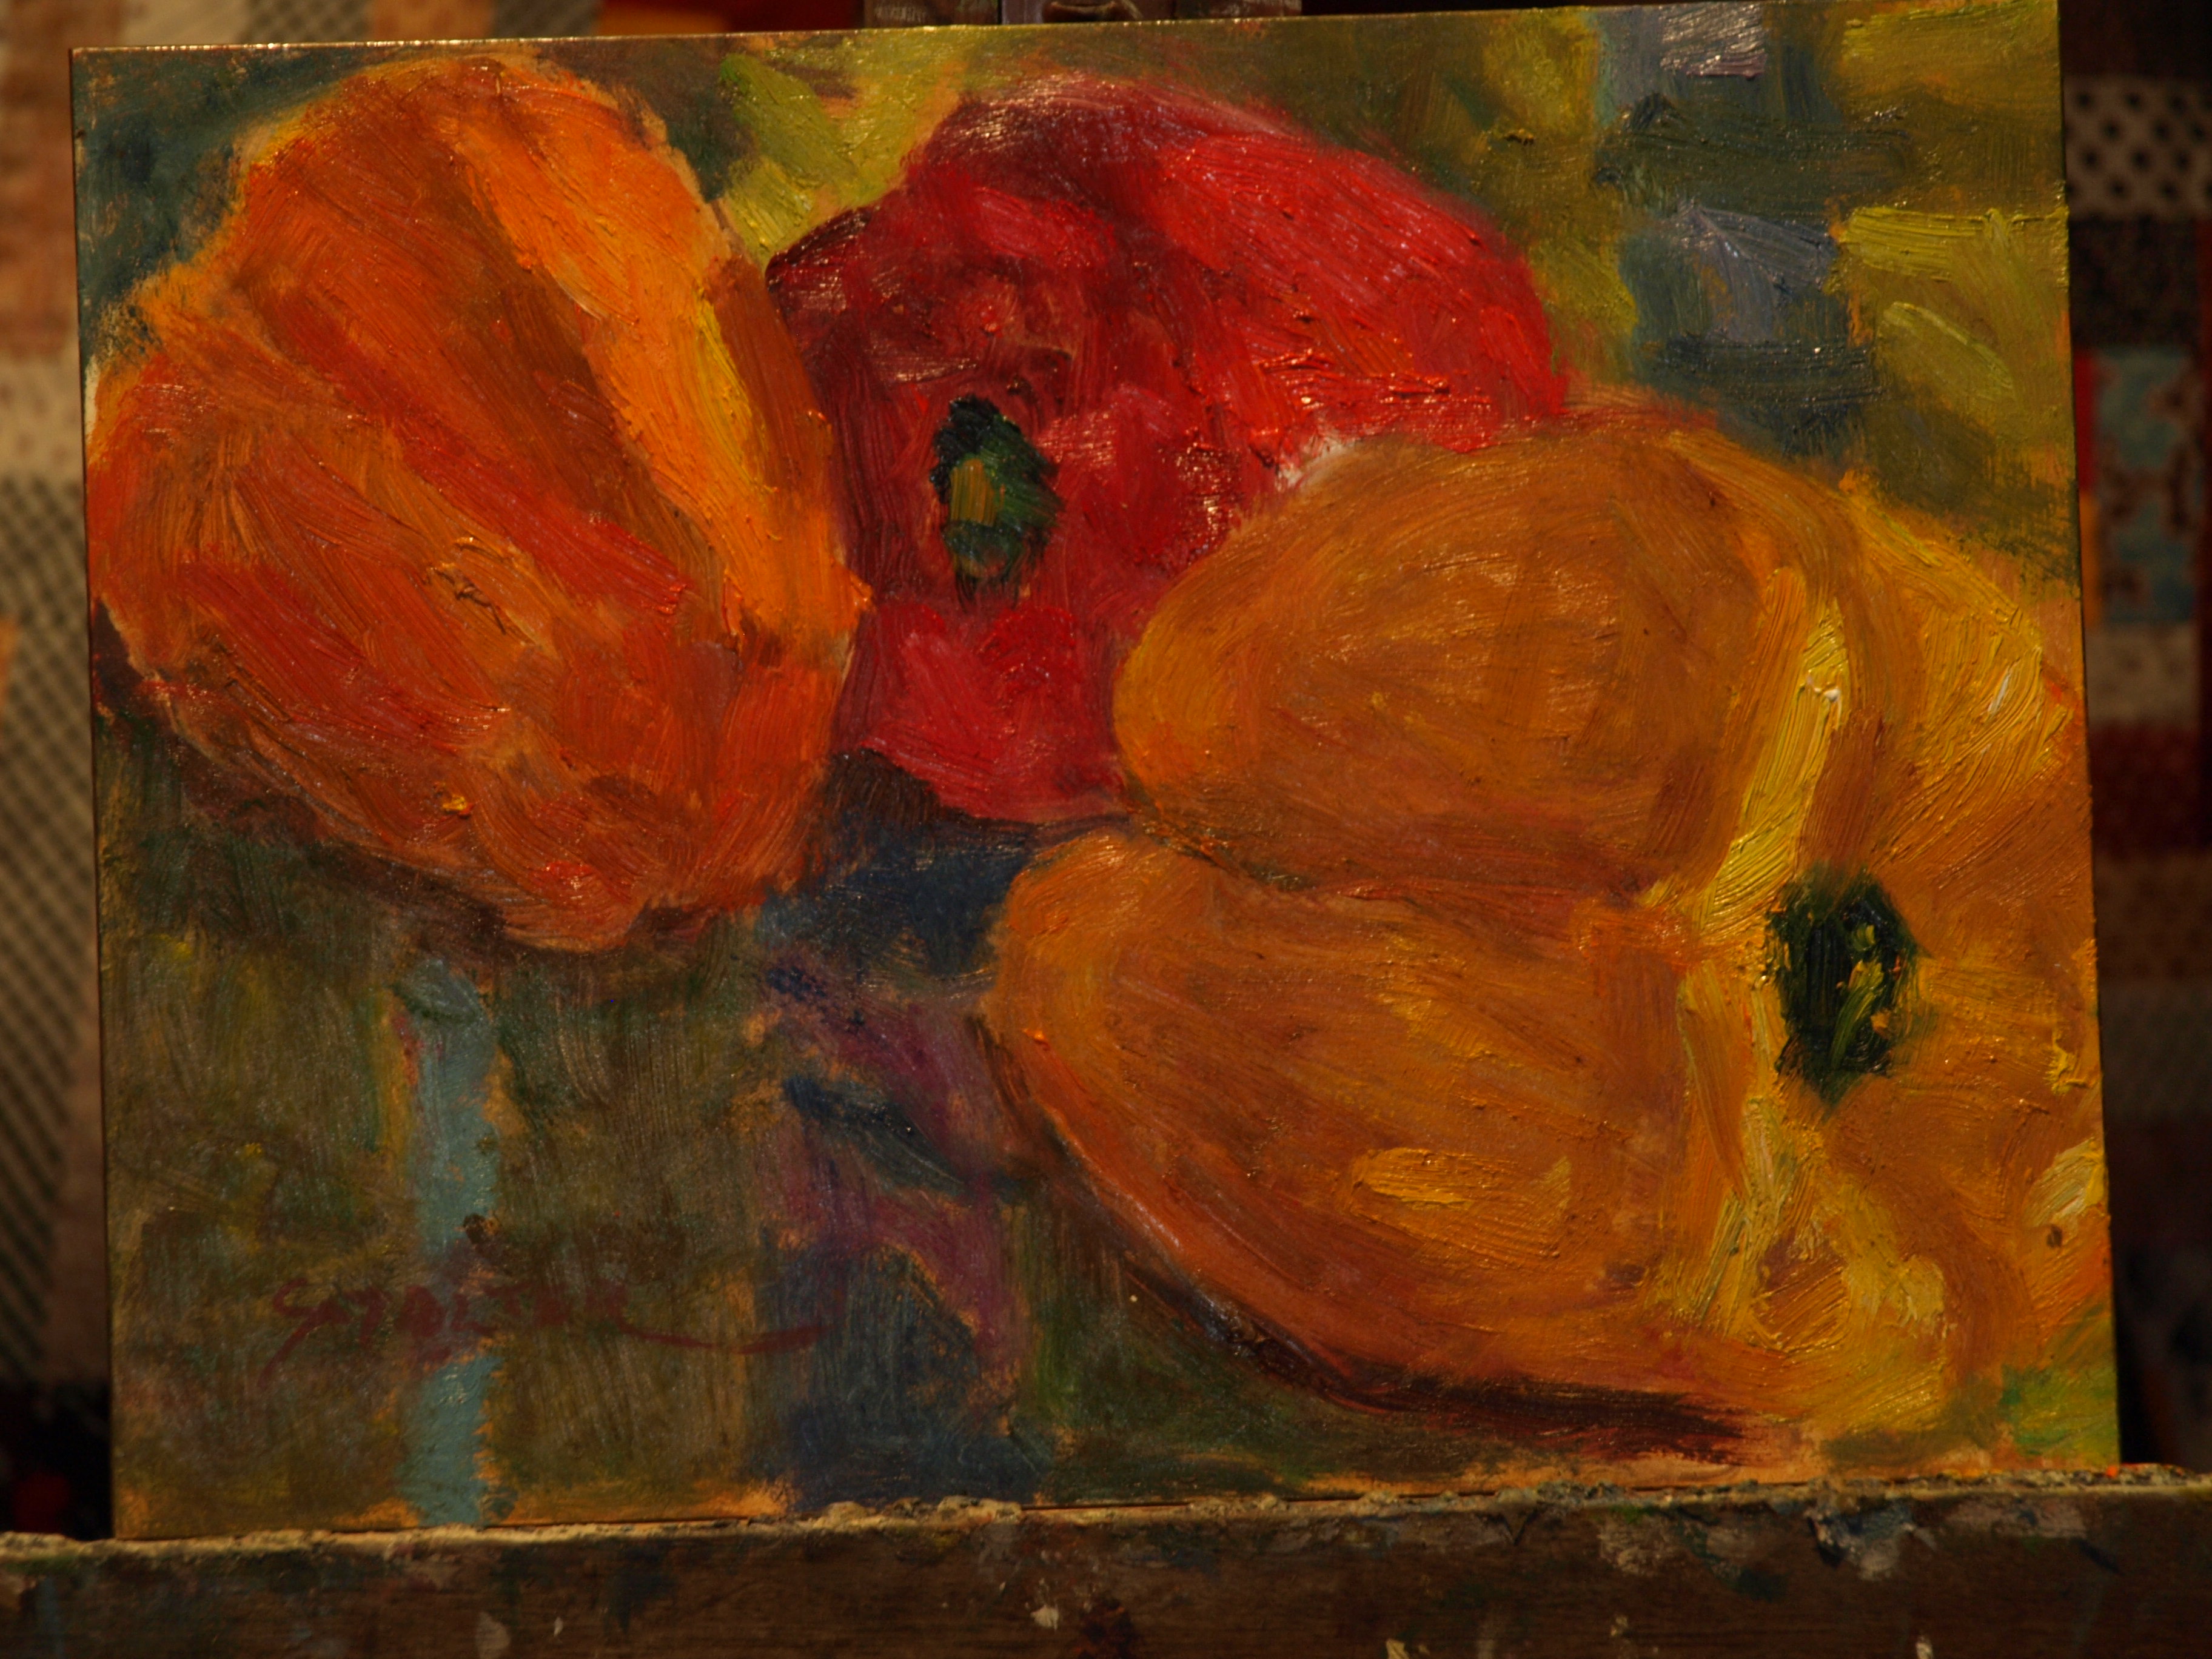 Three Peppers, Oil on Canvas on Panel, 9 x 12 Inches, by Richard Stalter, $225